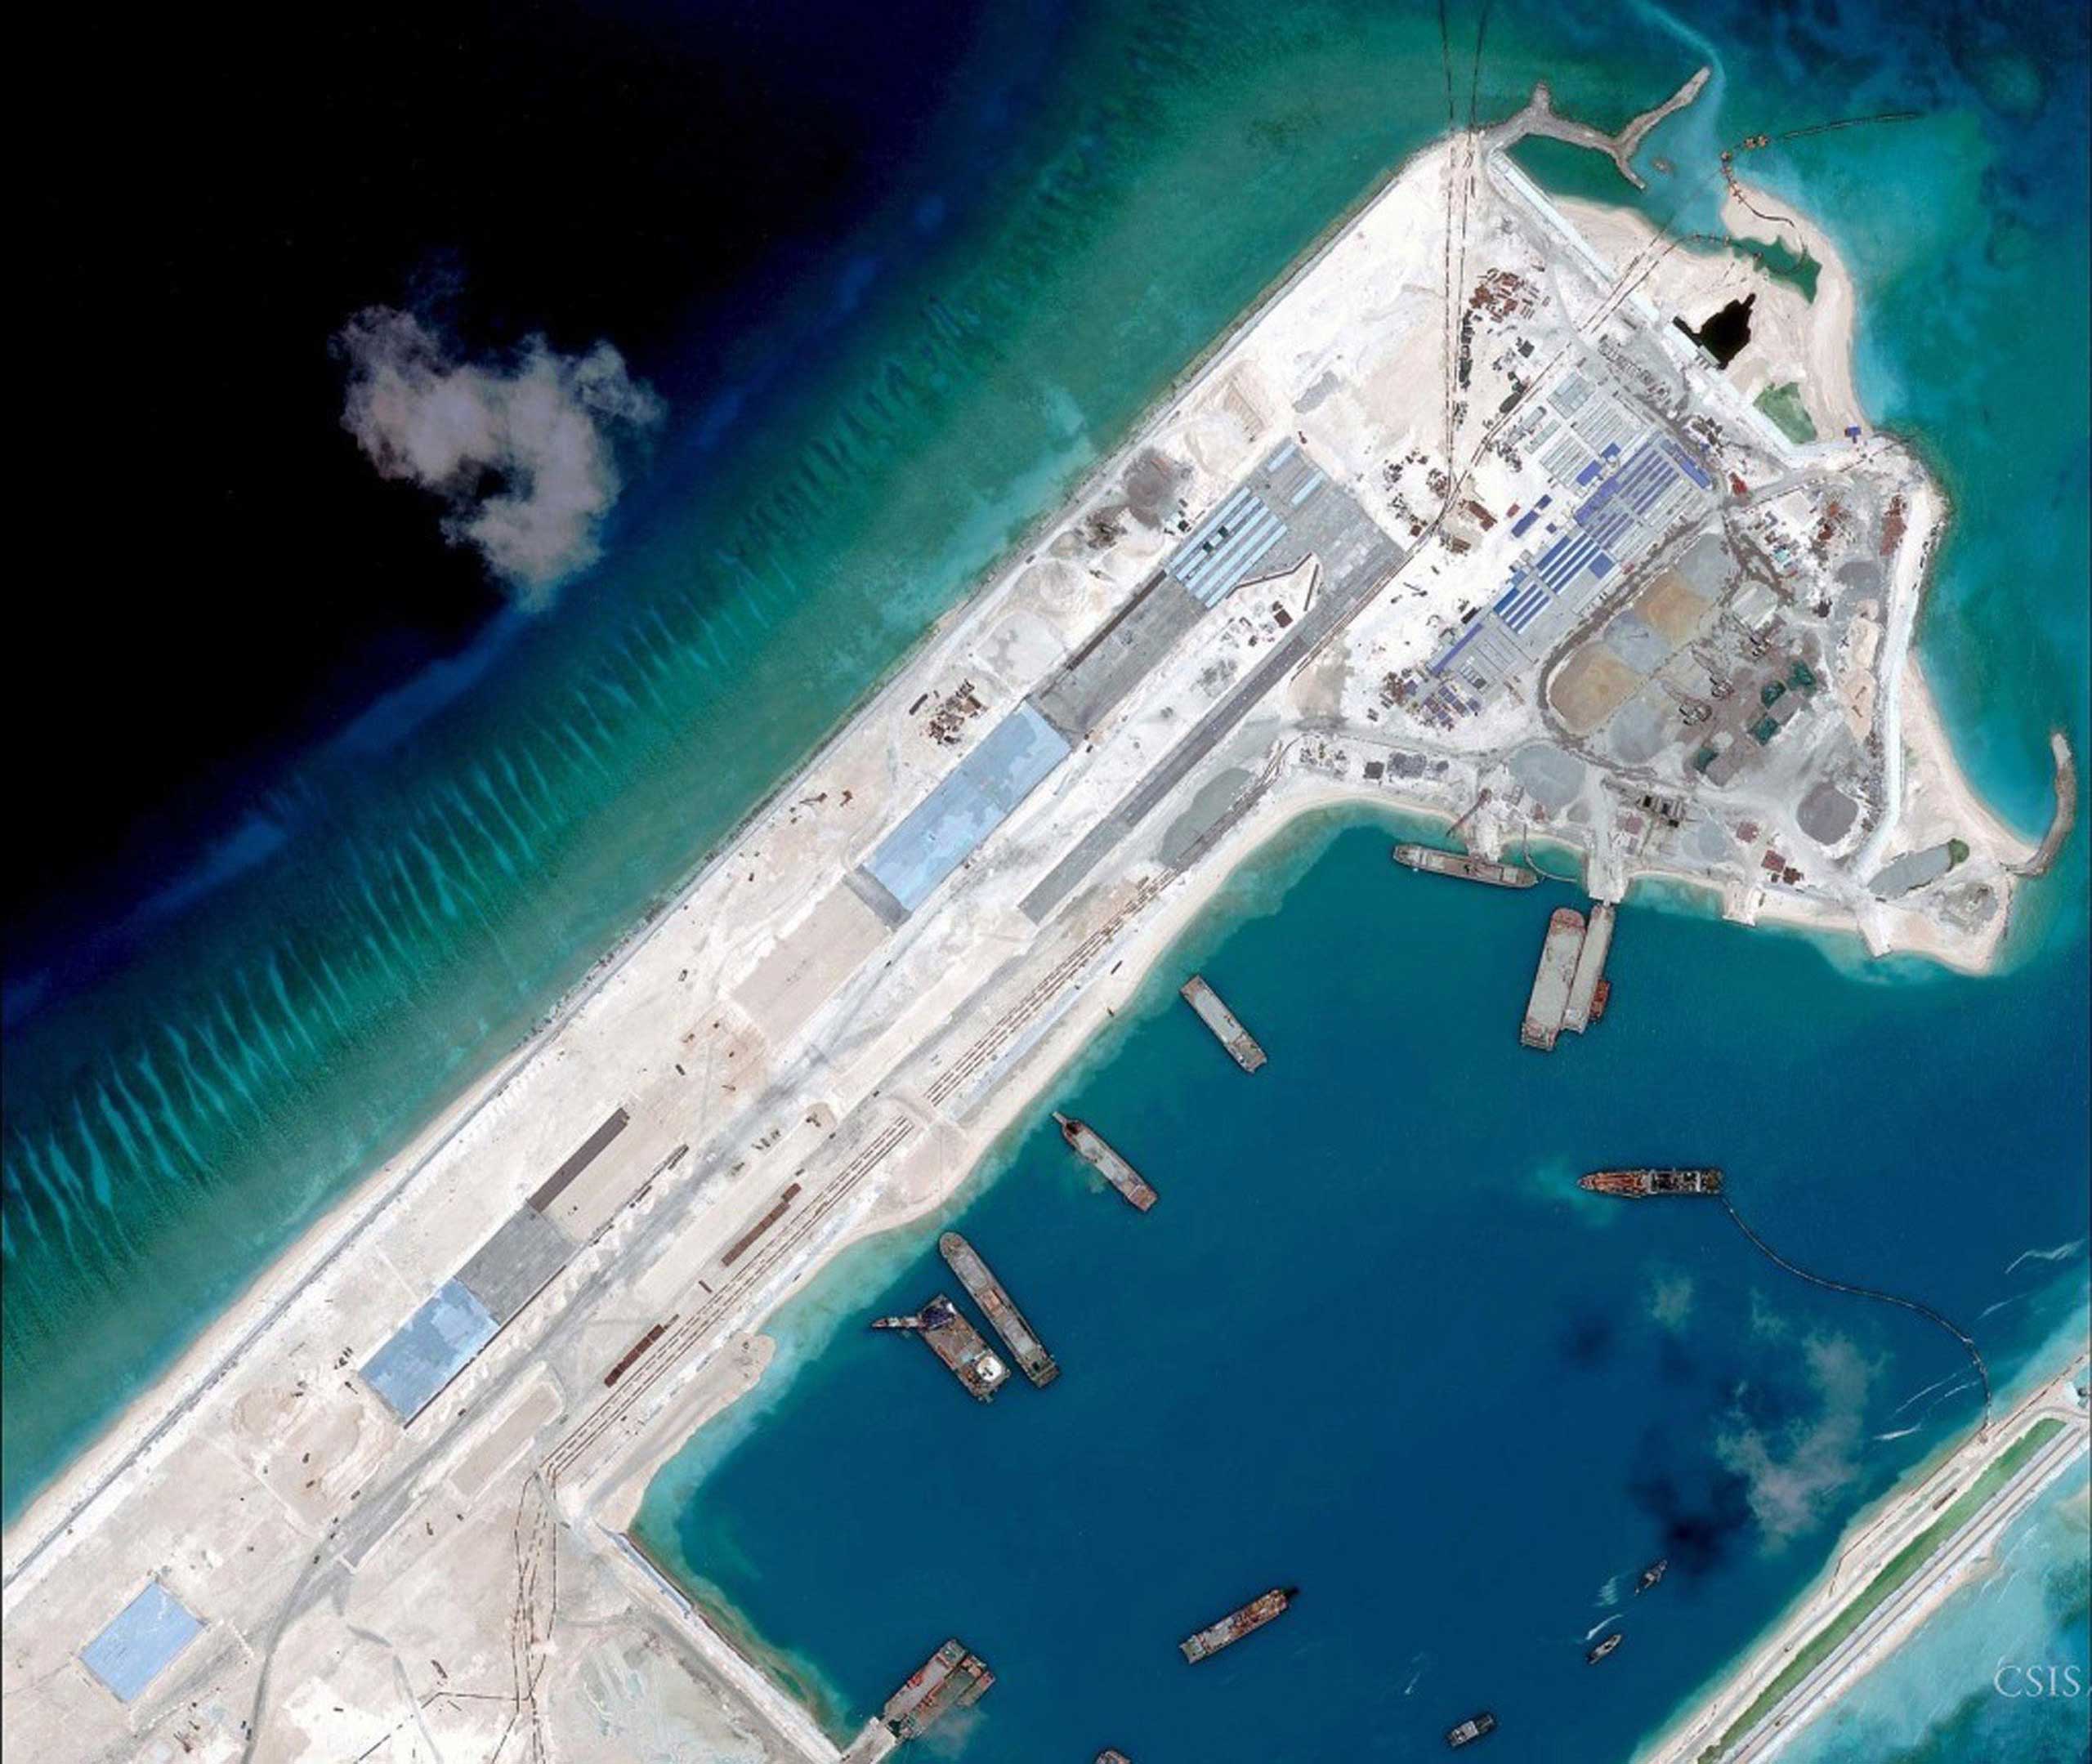 Satellite image of an arstrip construction on Fiery Cross Reef in the South China Sea